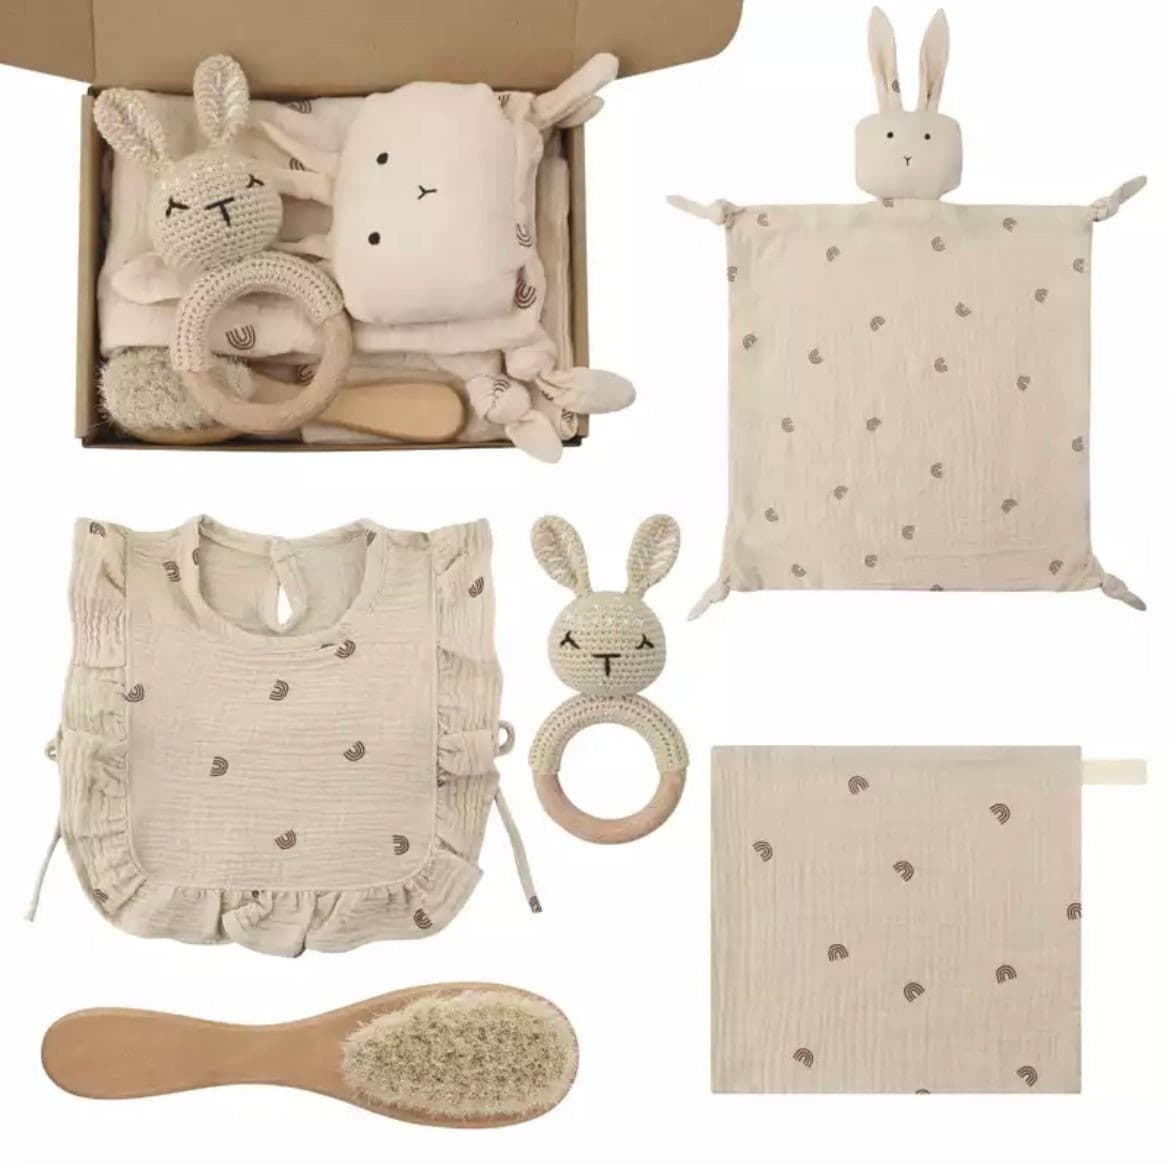 Unisex Baby Muslin Gift Set | Baby Muslin Cotton Bib  | Baby Shower Pr-
 This is a gorgeous muslin cotton gift set is a perfect set of items carefully made and packed for a newborn!Product Info -This lovely muslin set includes:- A rever-Bijou Bubs